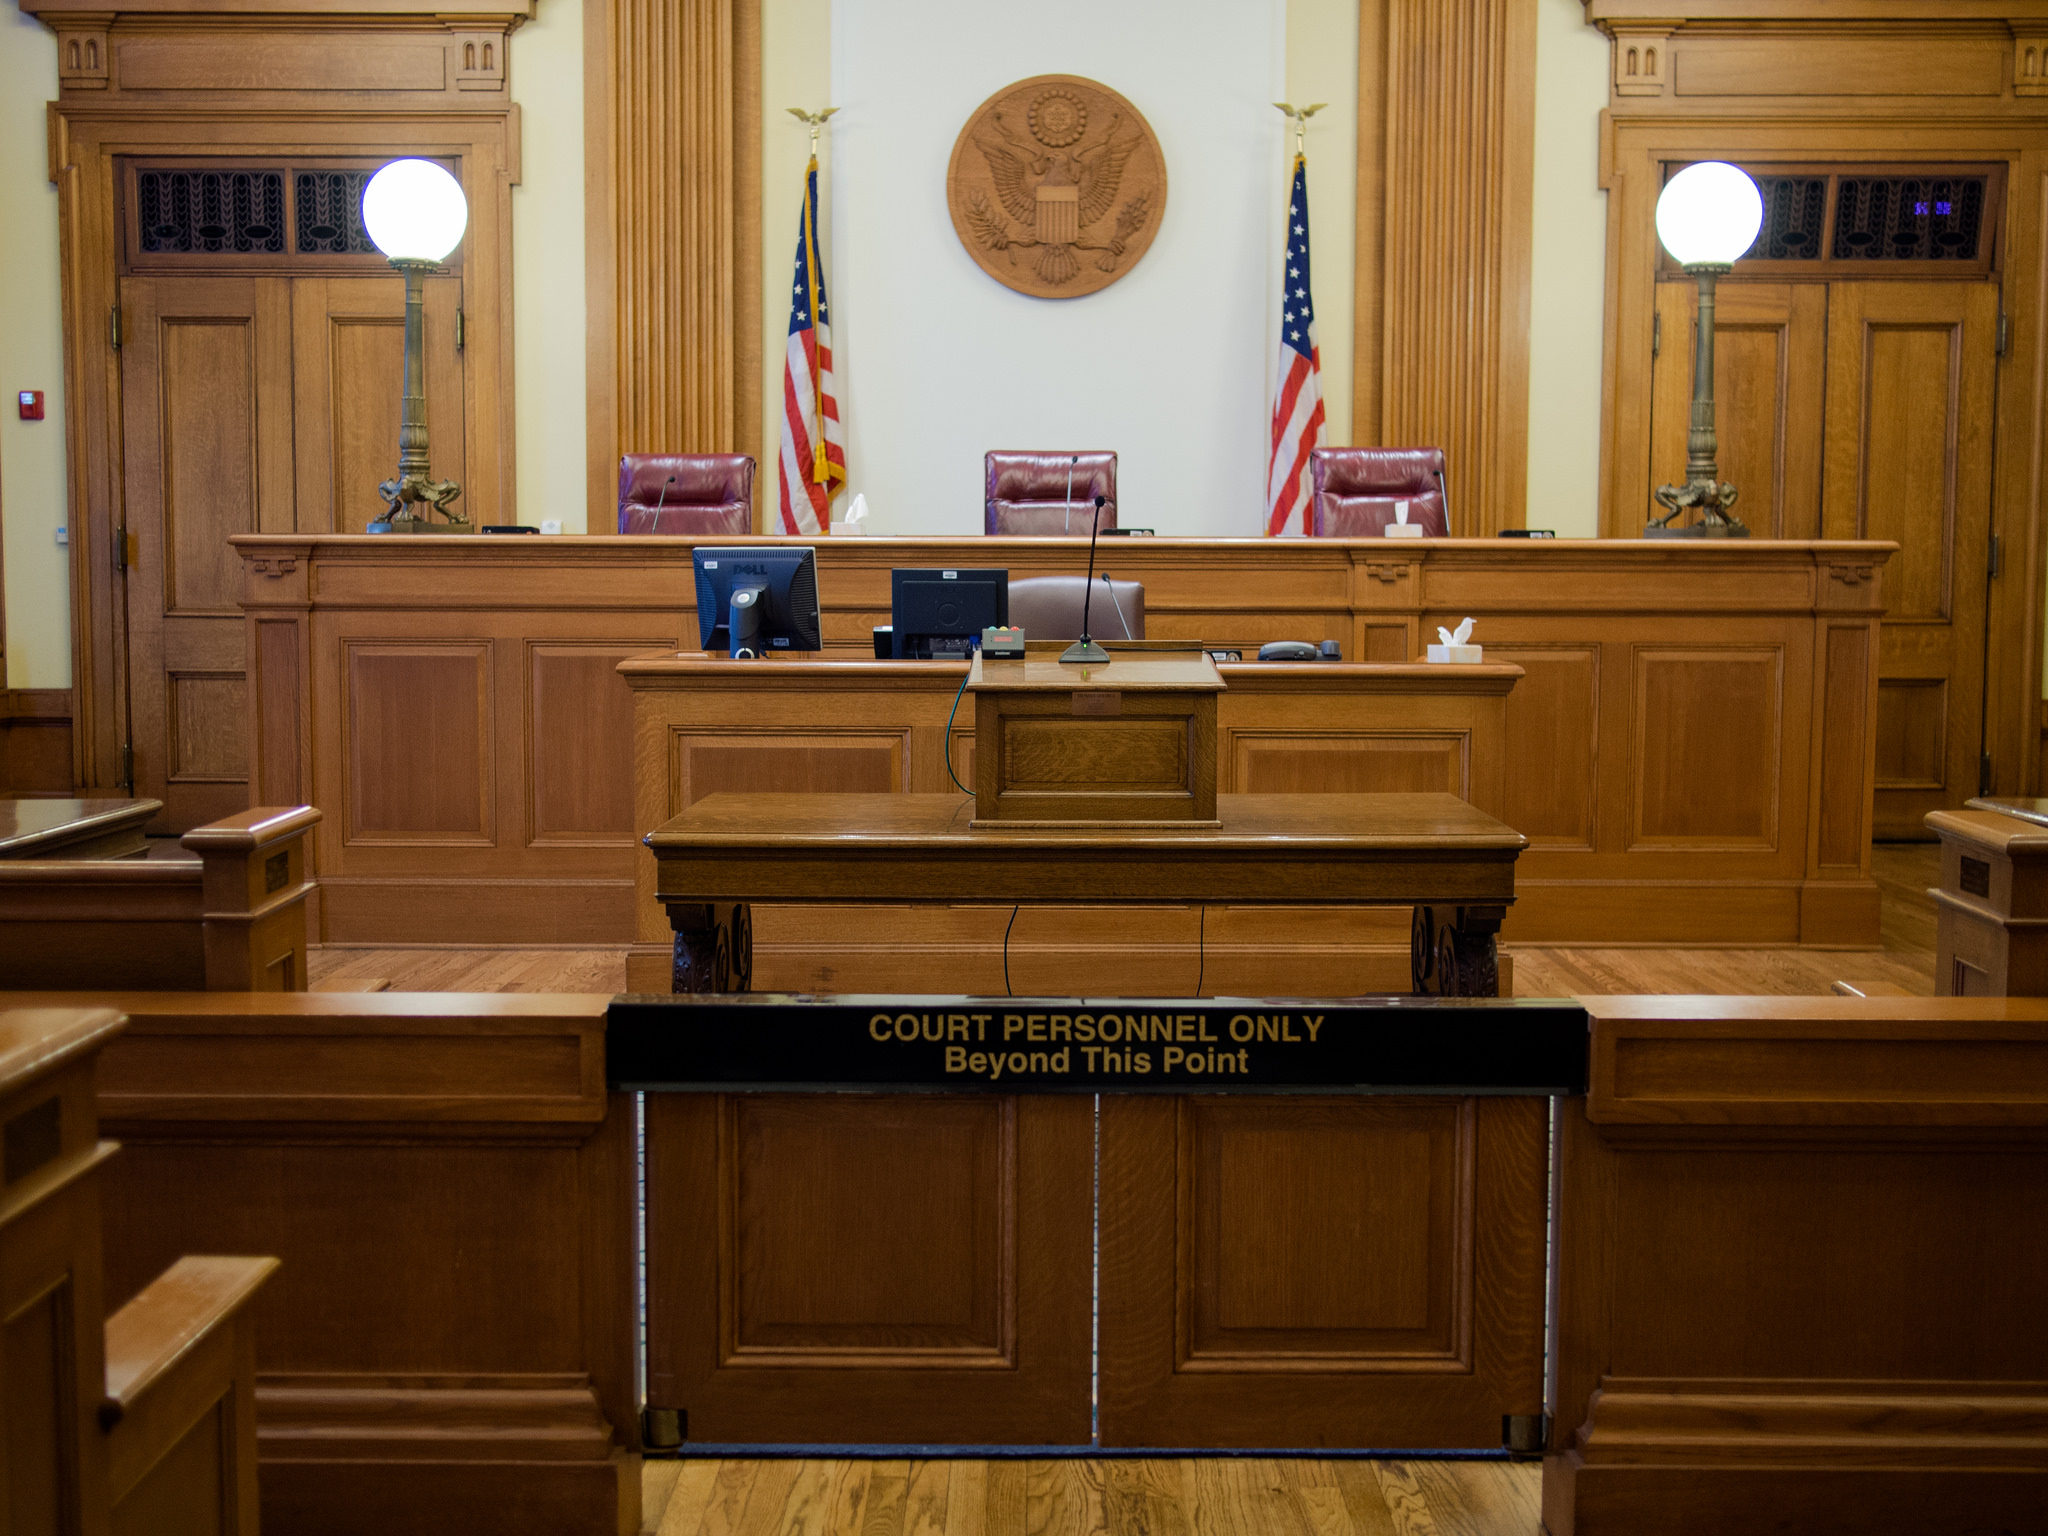 Photograph of an empty courtroom